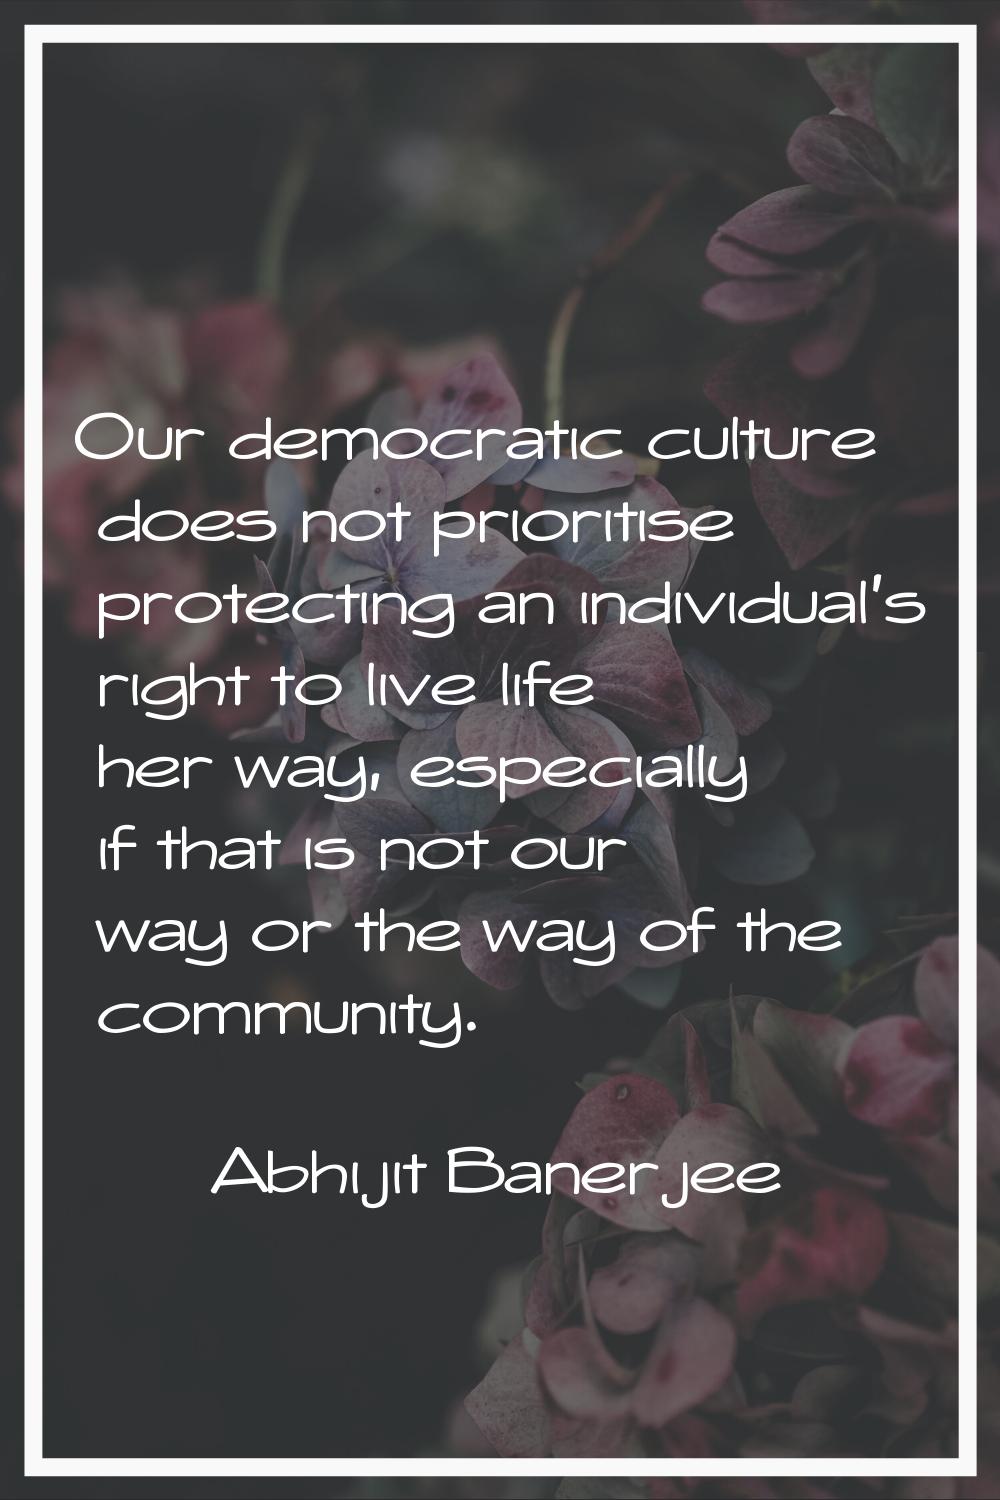 Our democratic culture does not prioritise protecting an individual's right to live life her way, e